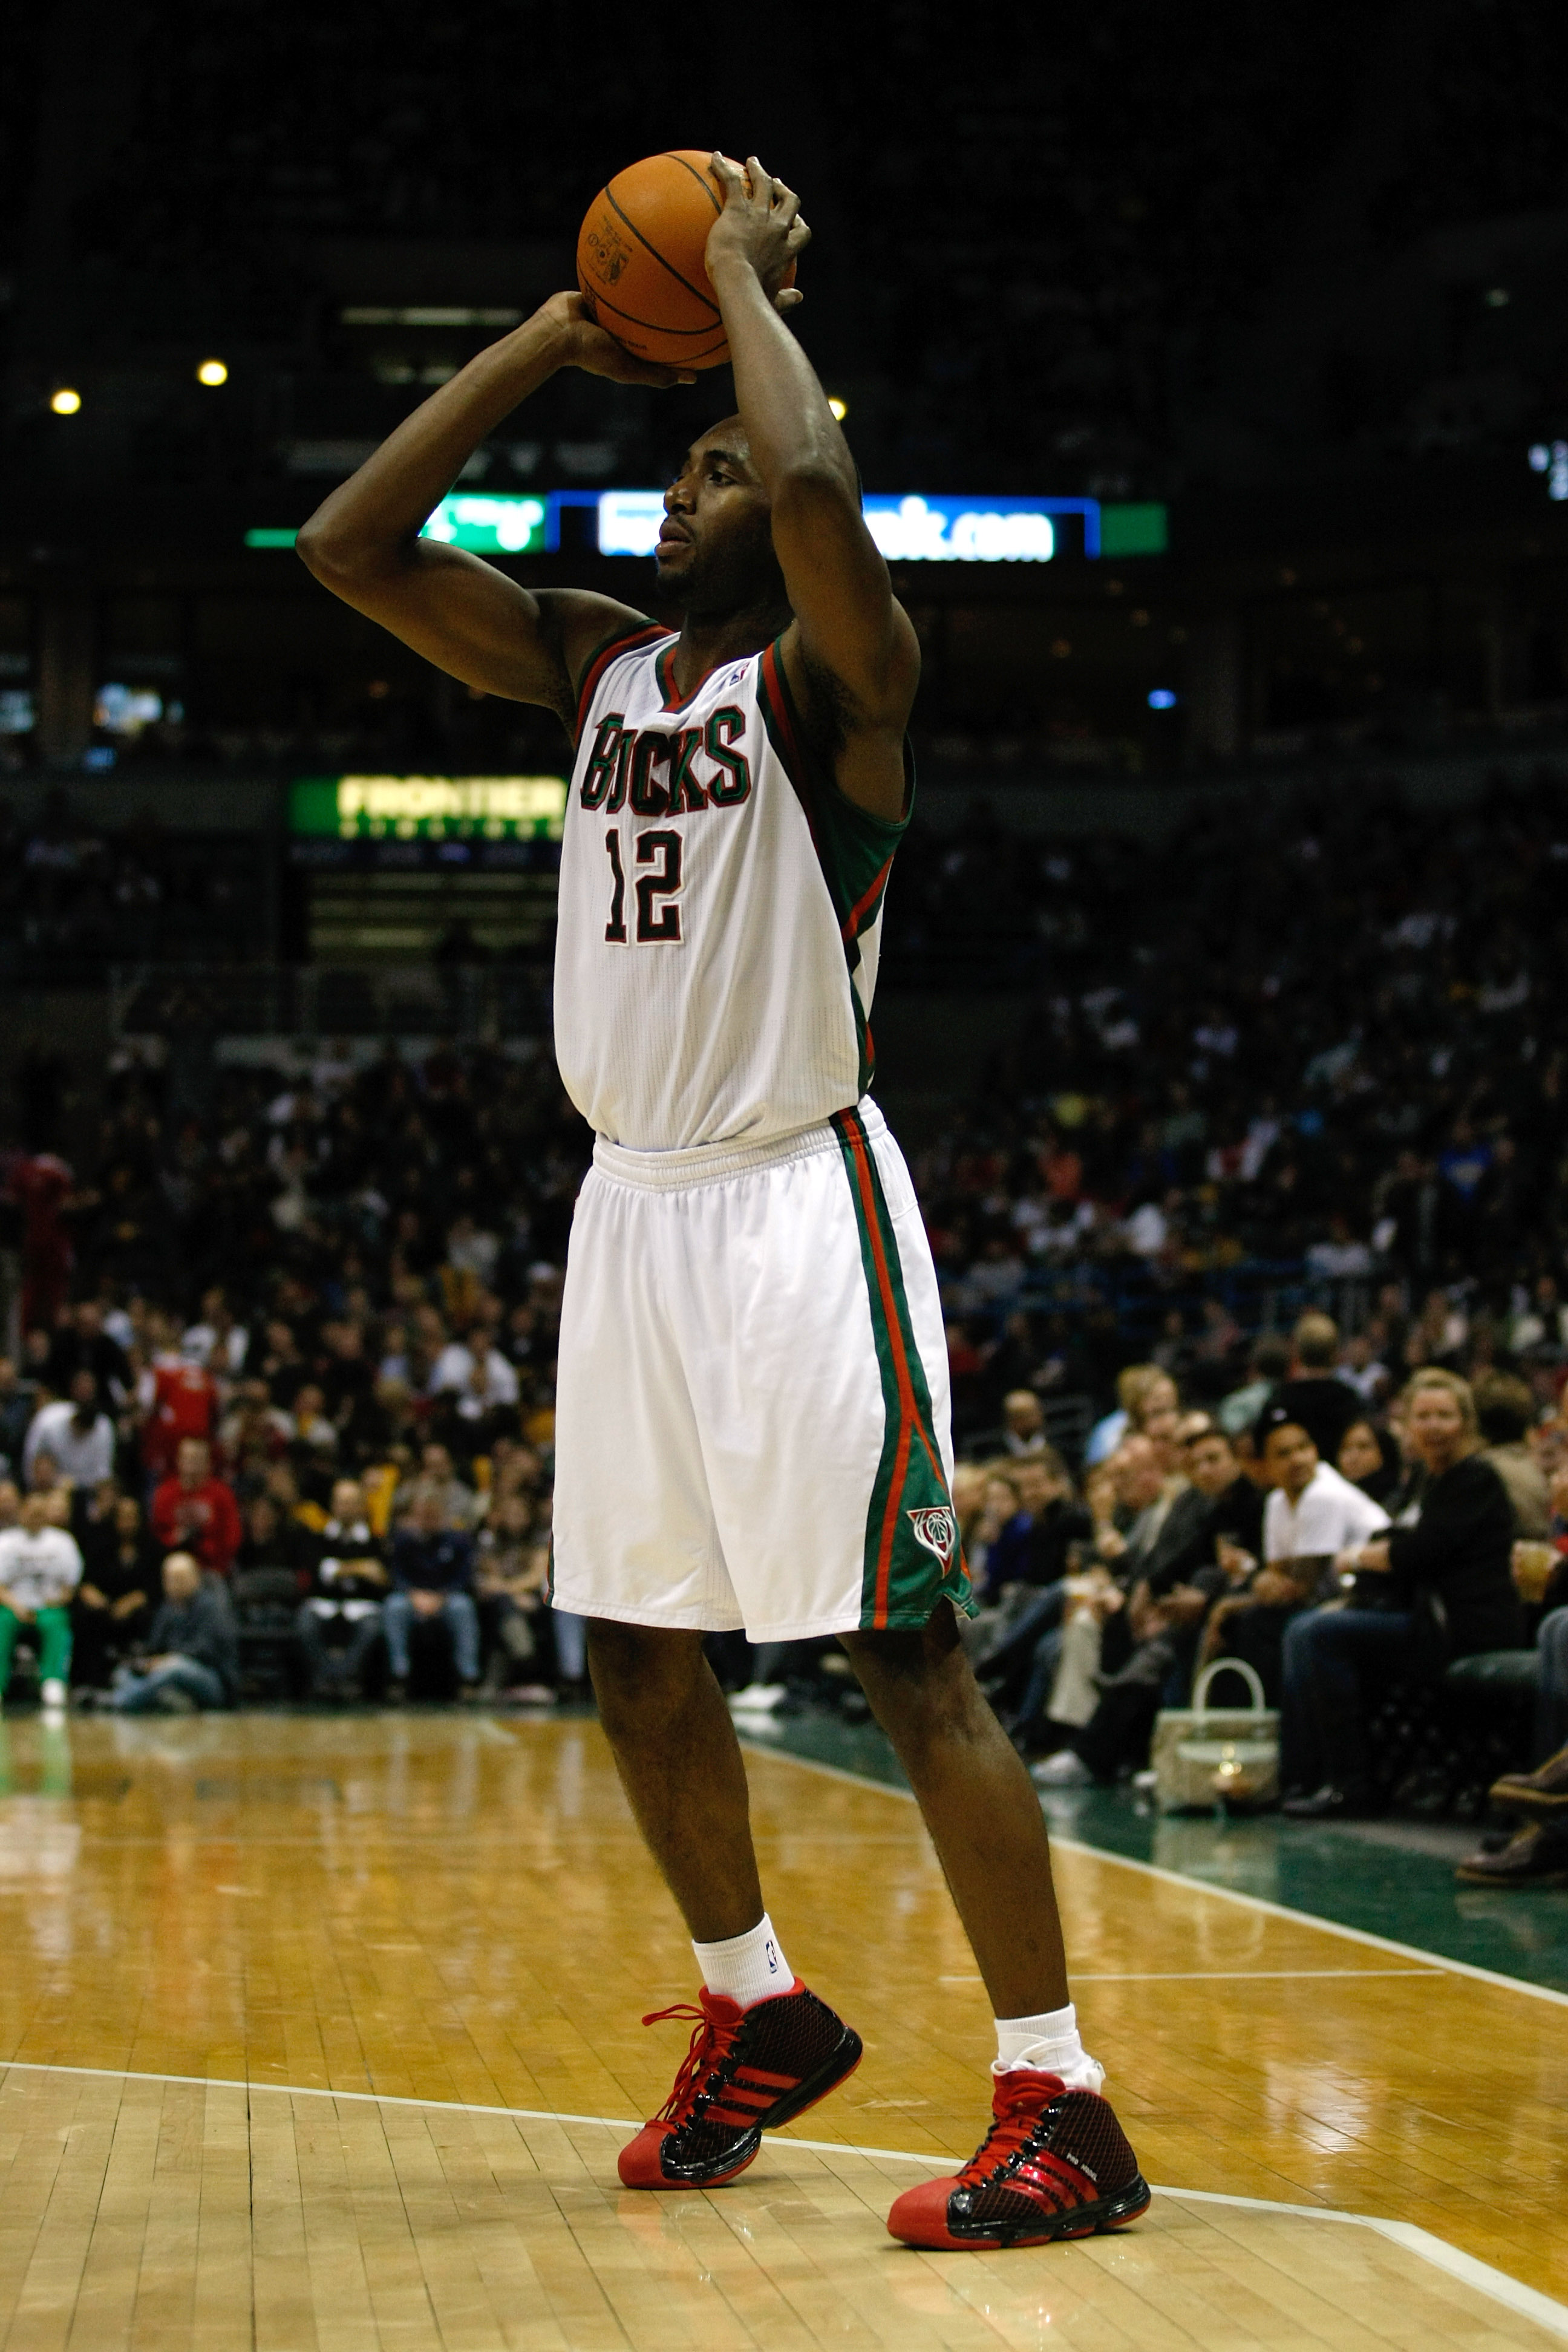 MILWAUKEE, WI - JANUARY 07: Luc Richard Mbah a Moute #12 of the Milwaukee Bucks shoots against the Miami Heat at the Bradley Center on January 7, 2011 in Milwaukee, Wisconsin. NOTE TO USER: User expressly acknowledges and agrees that, by downloading and o